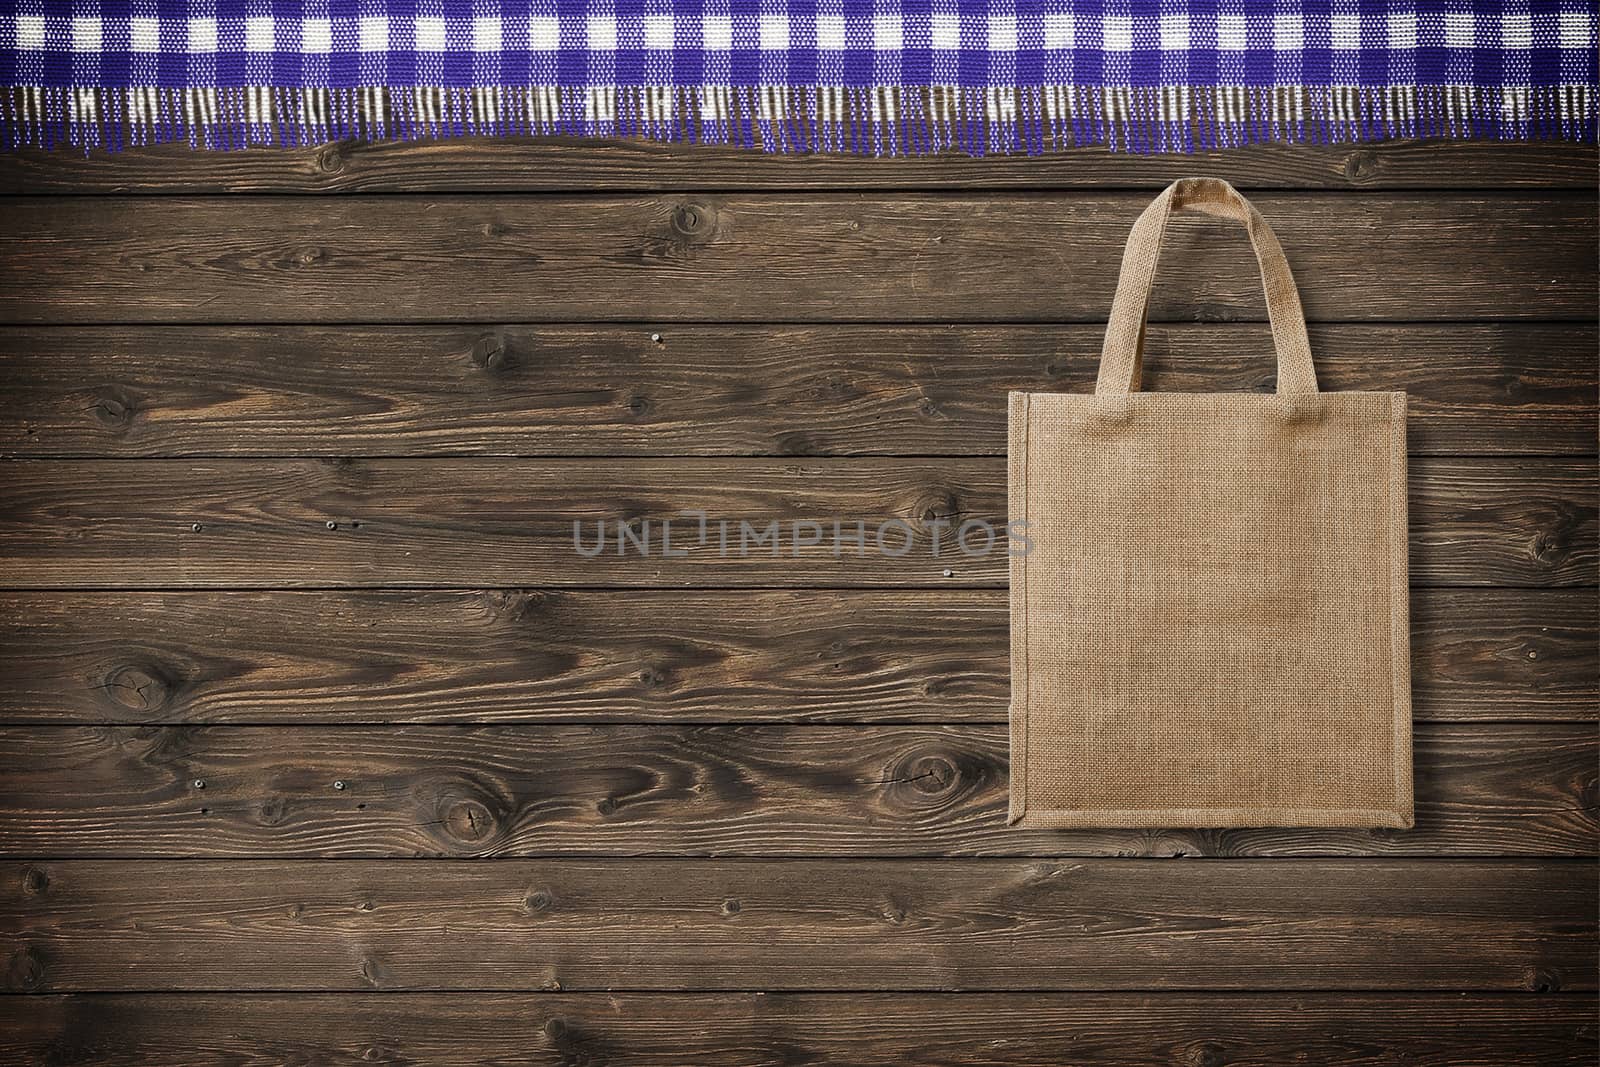 eco bag for shopping on wooden background